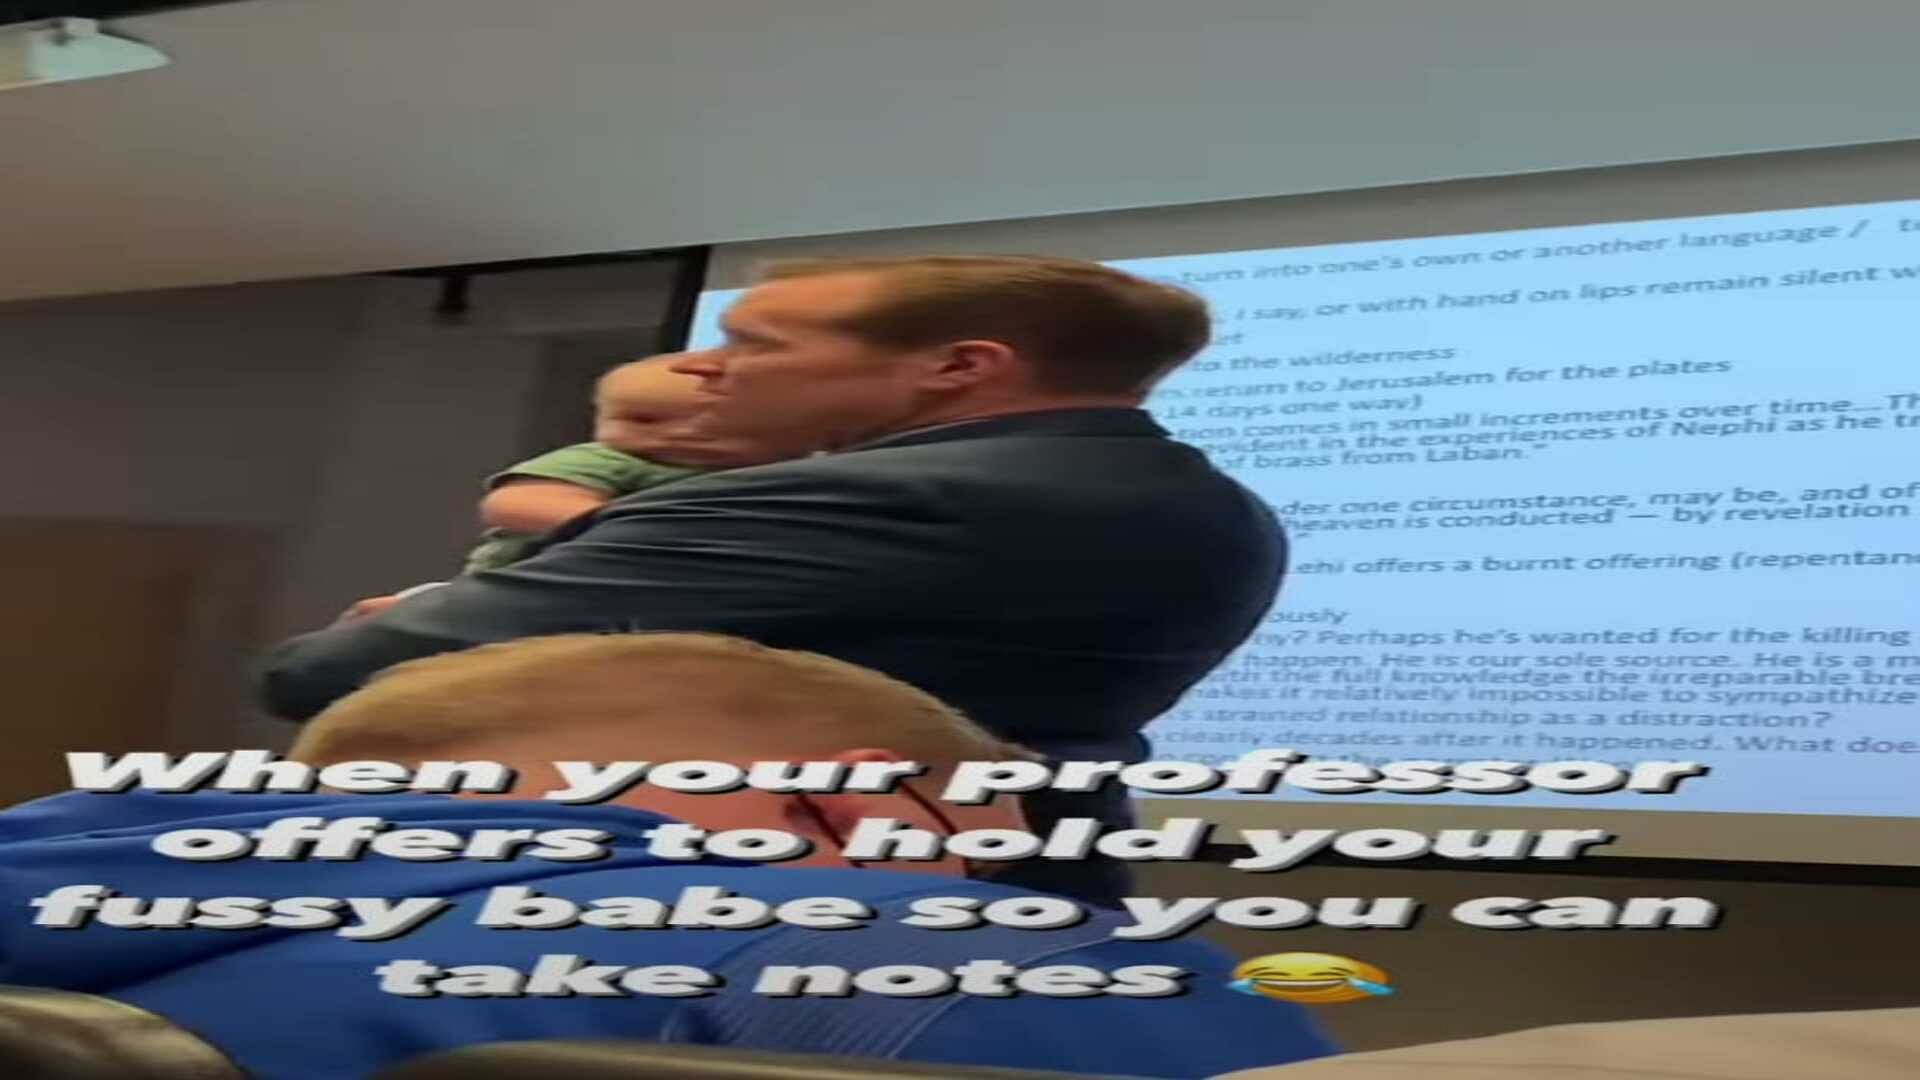 During lecture University Professor took the child in his lap video goes  viral on social media